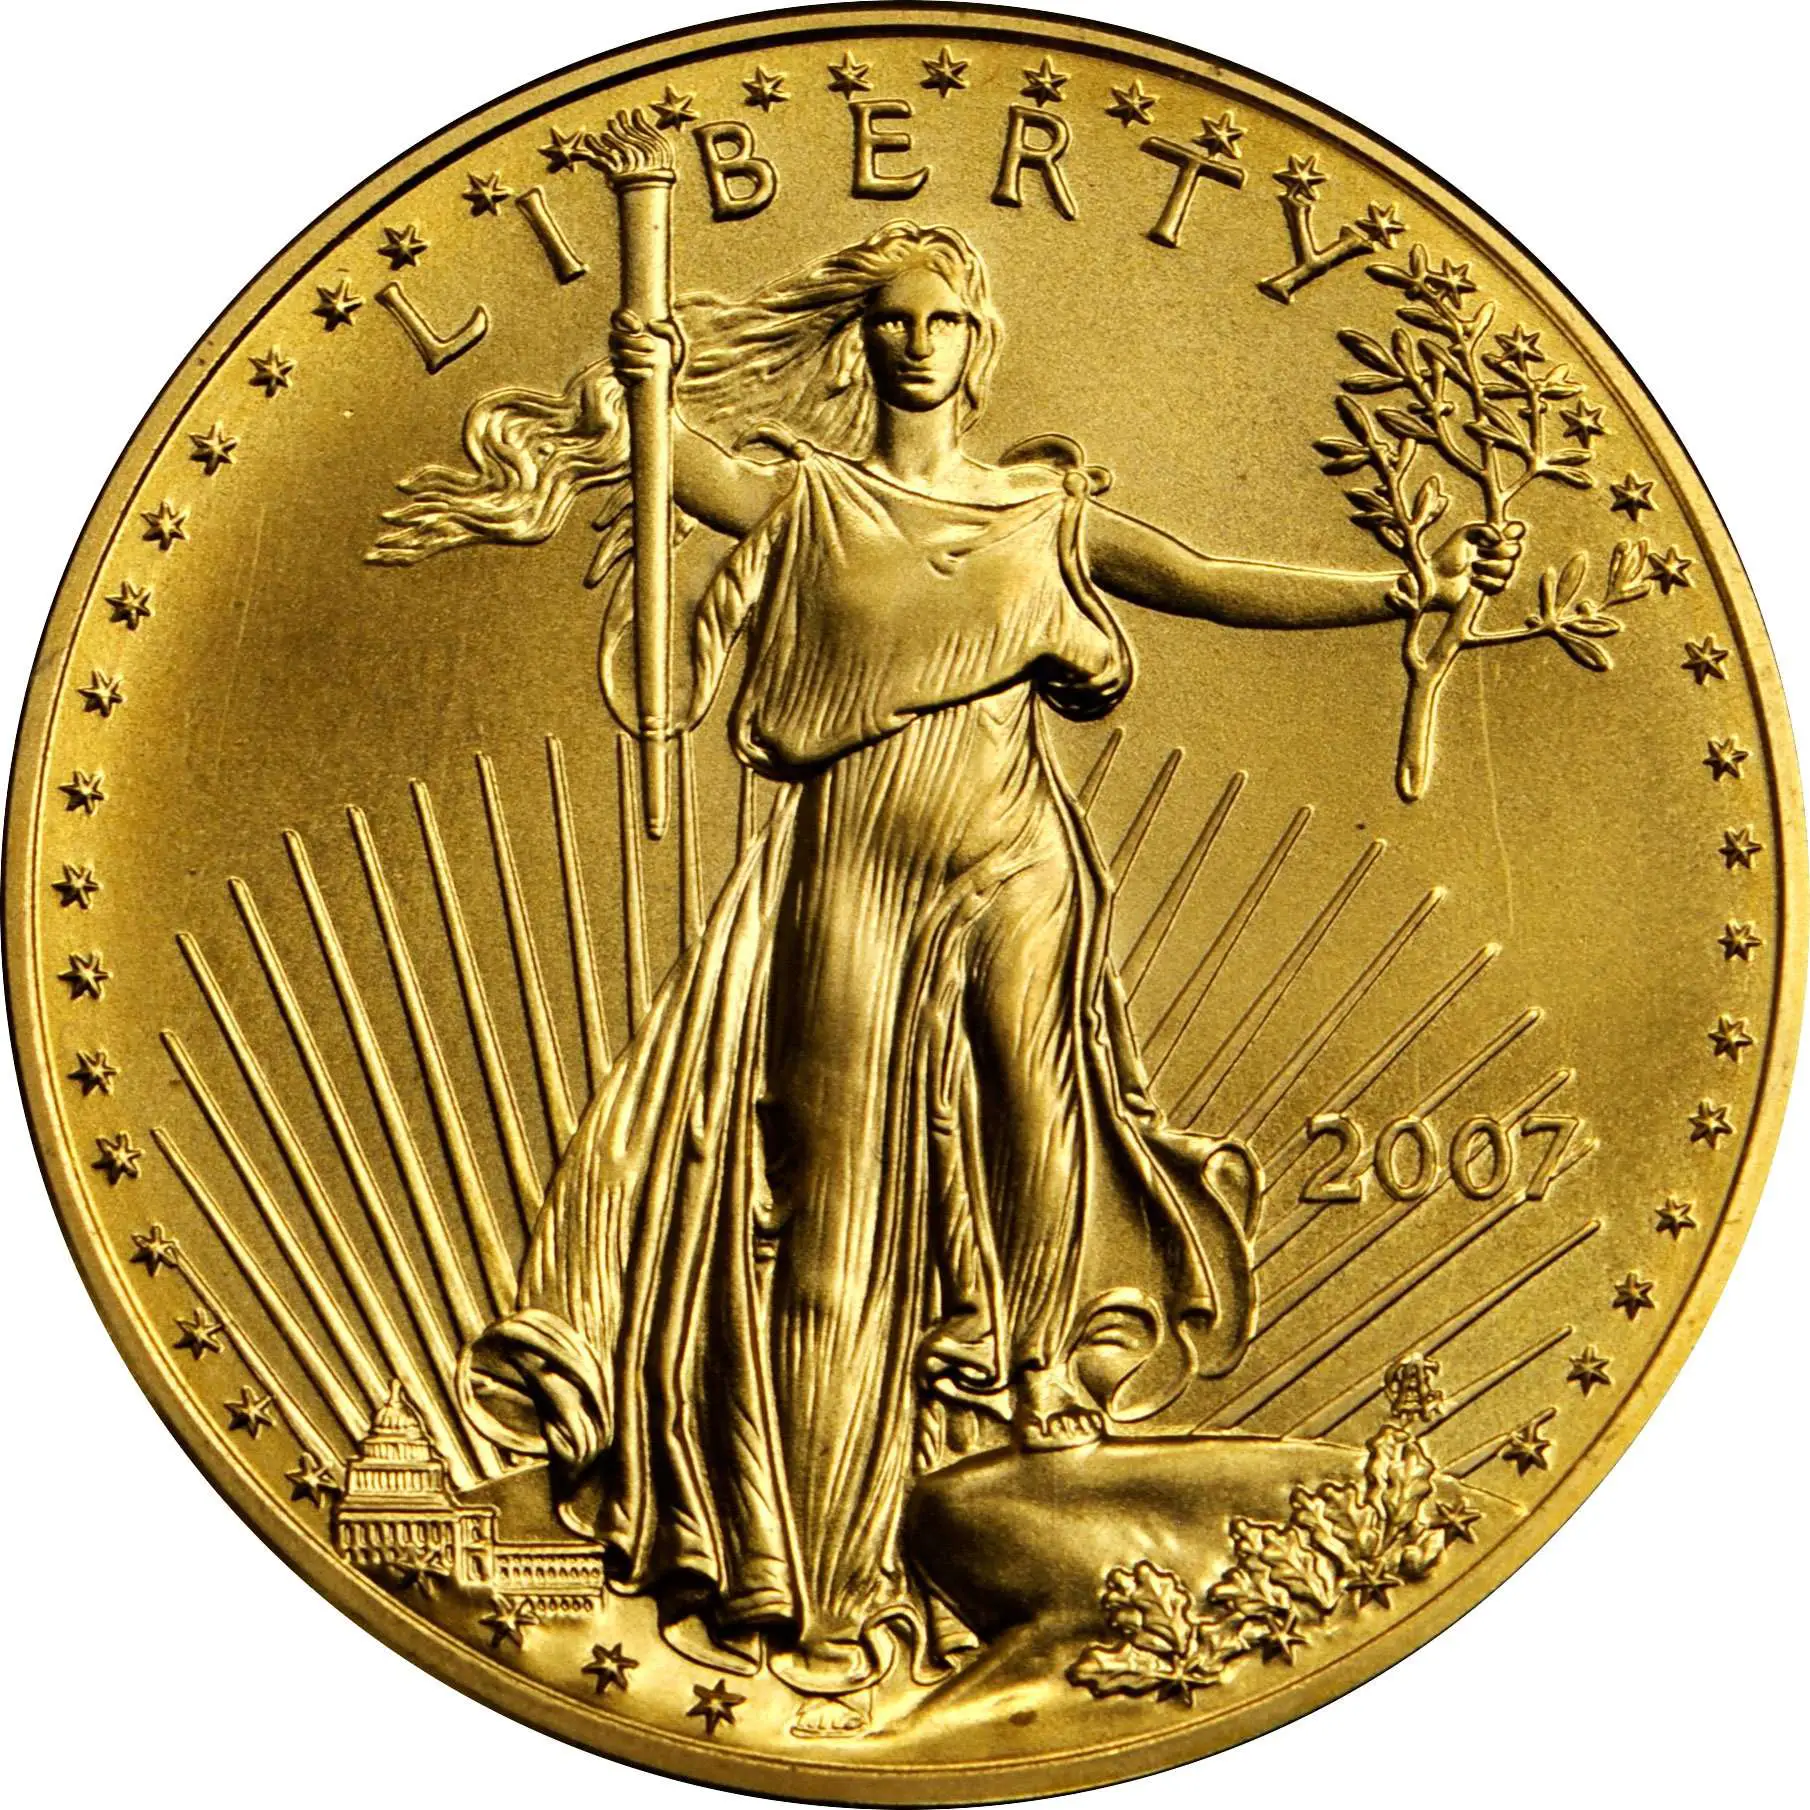 Value of 2007 $25 Gold Coin